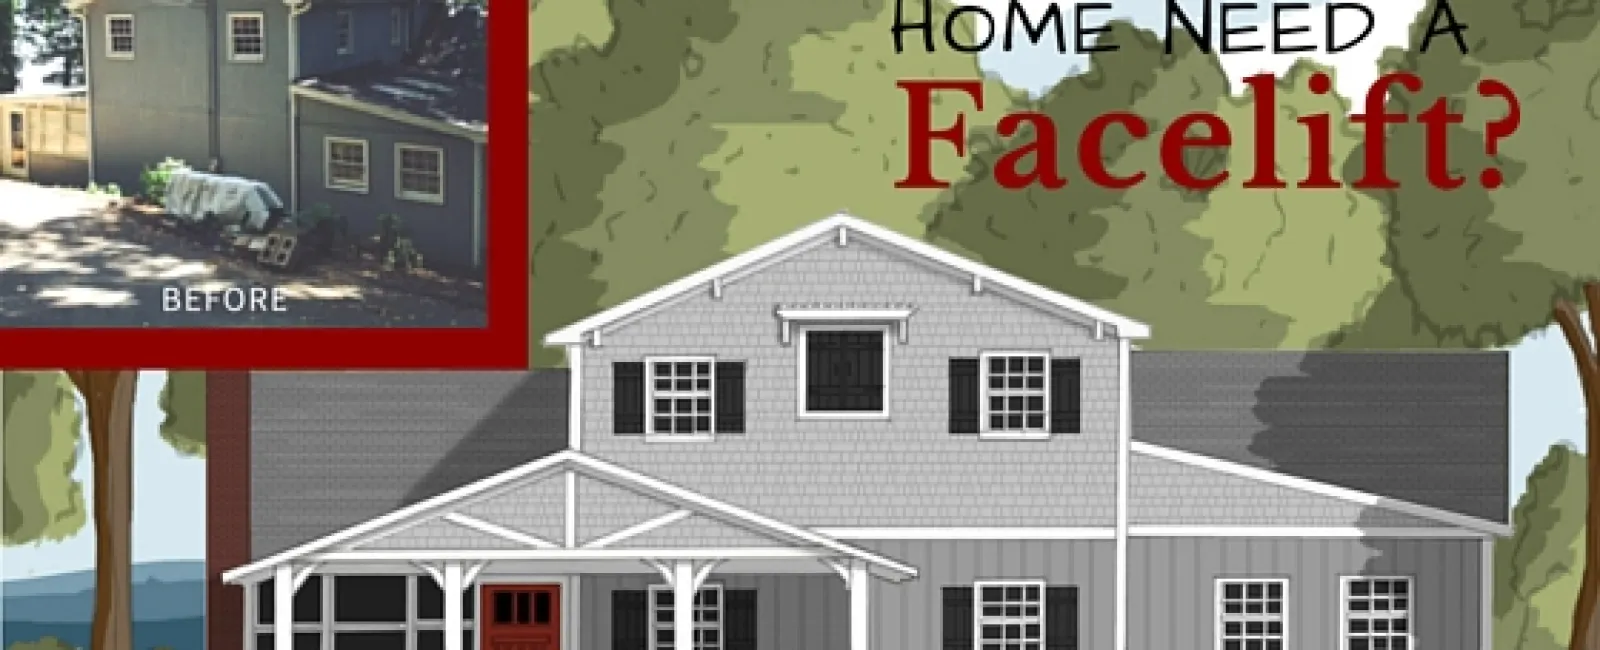 HOW AND WHY SHOULD I GIVE MY HOME AN EXTERIOR FACELIFT?